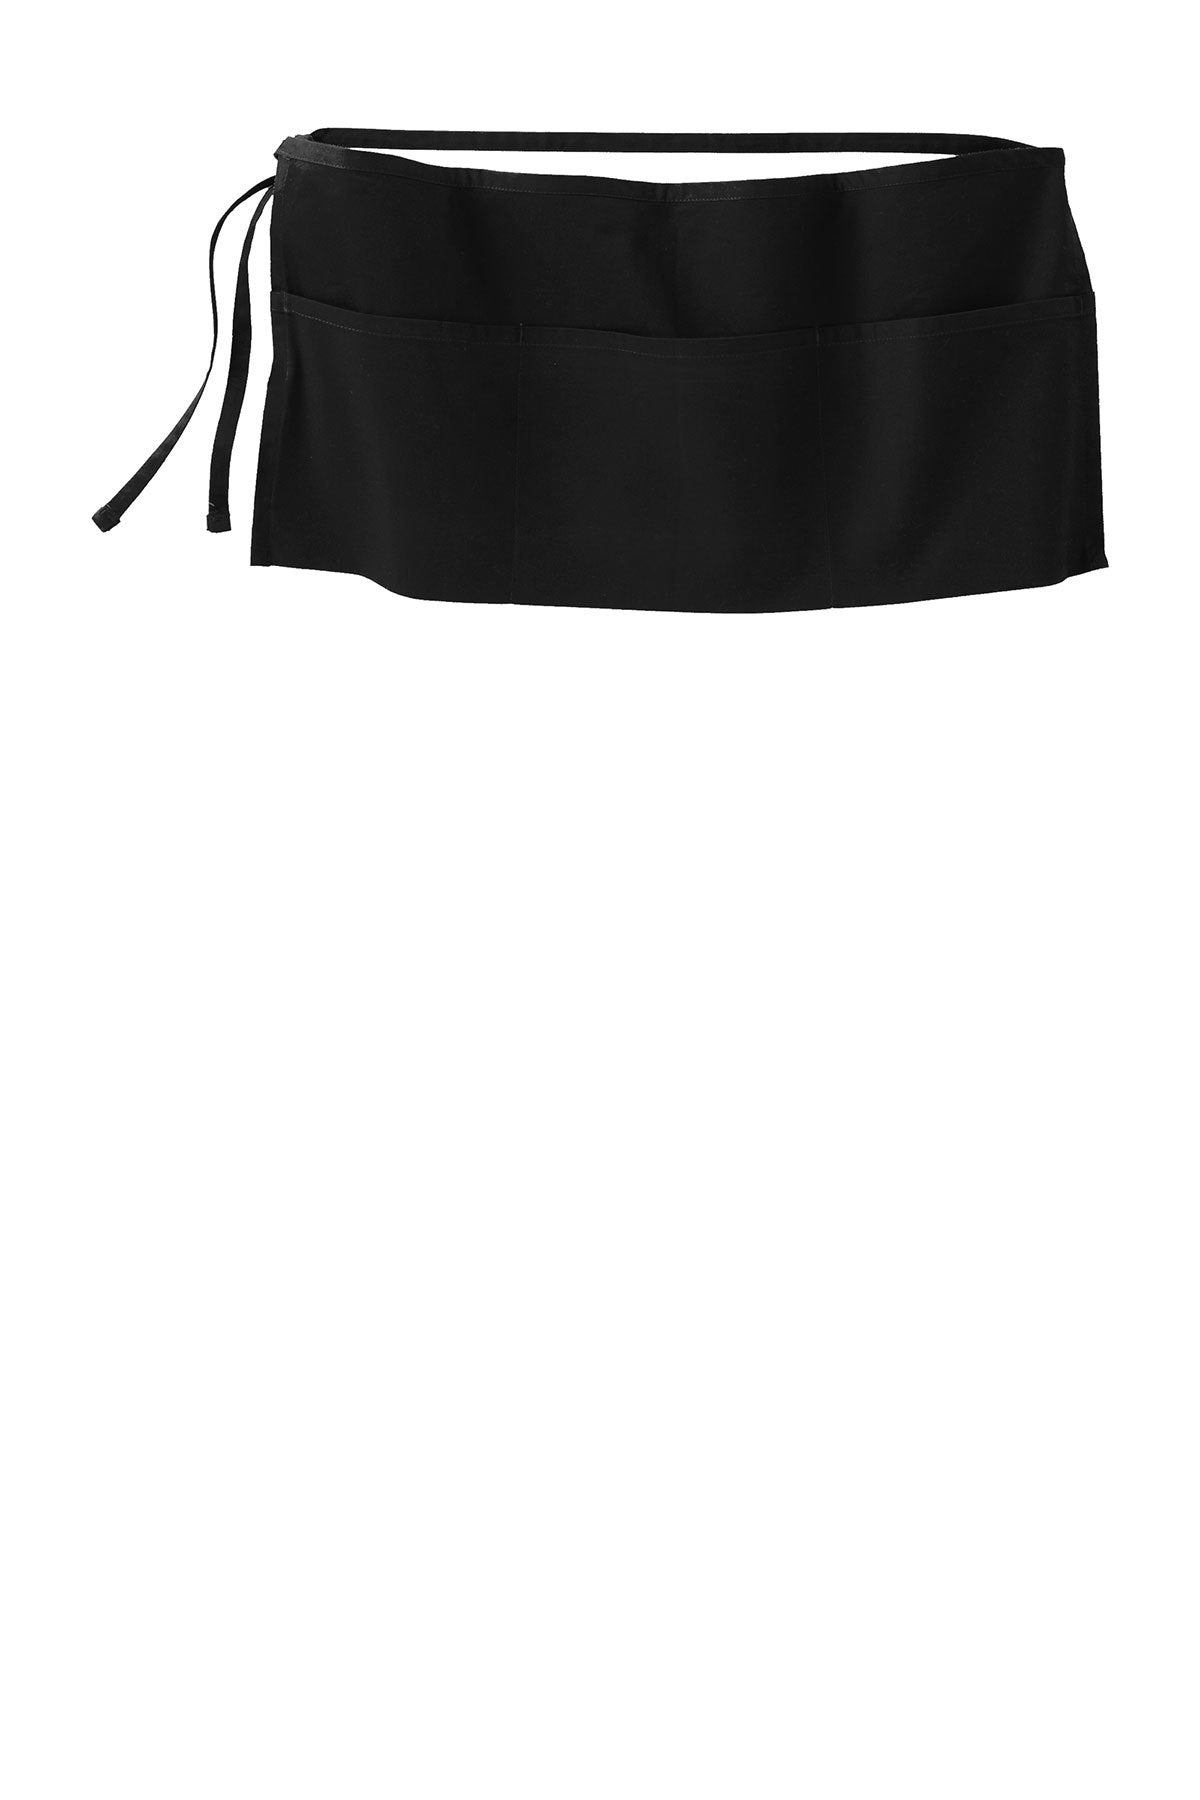 Port Authority Easy Care Branded Waist Aprons with Stain Release, Black